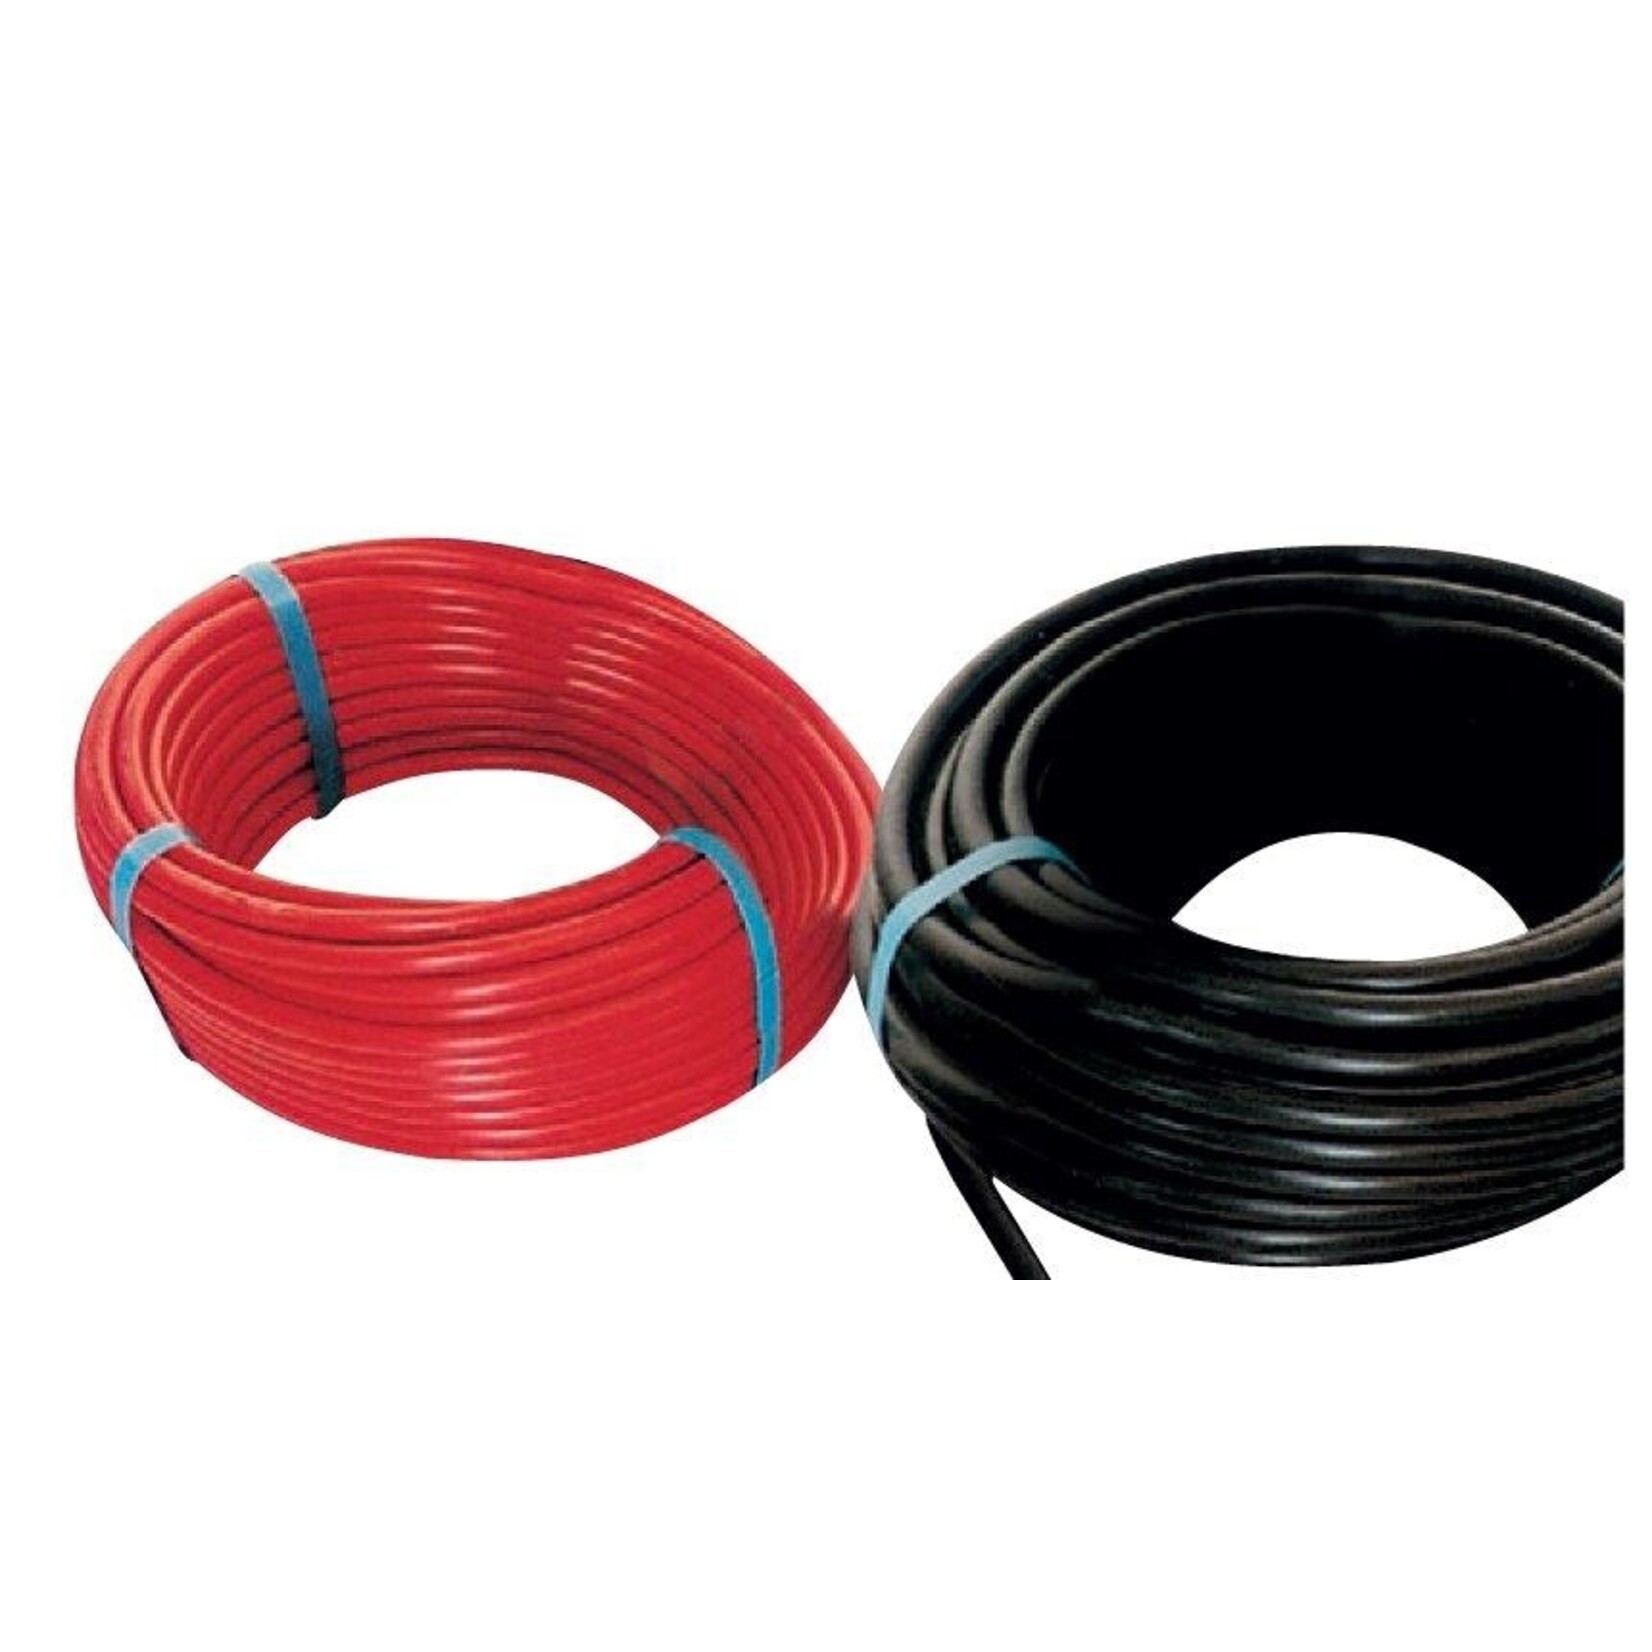 Plastimo Cable 25mm2 red 24tth 25m